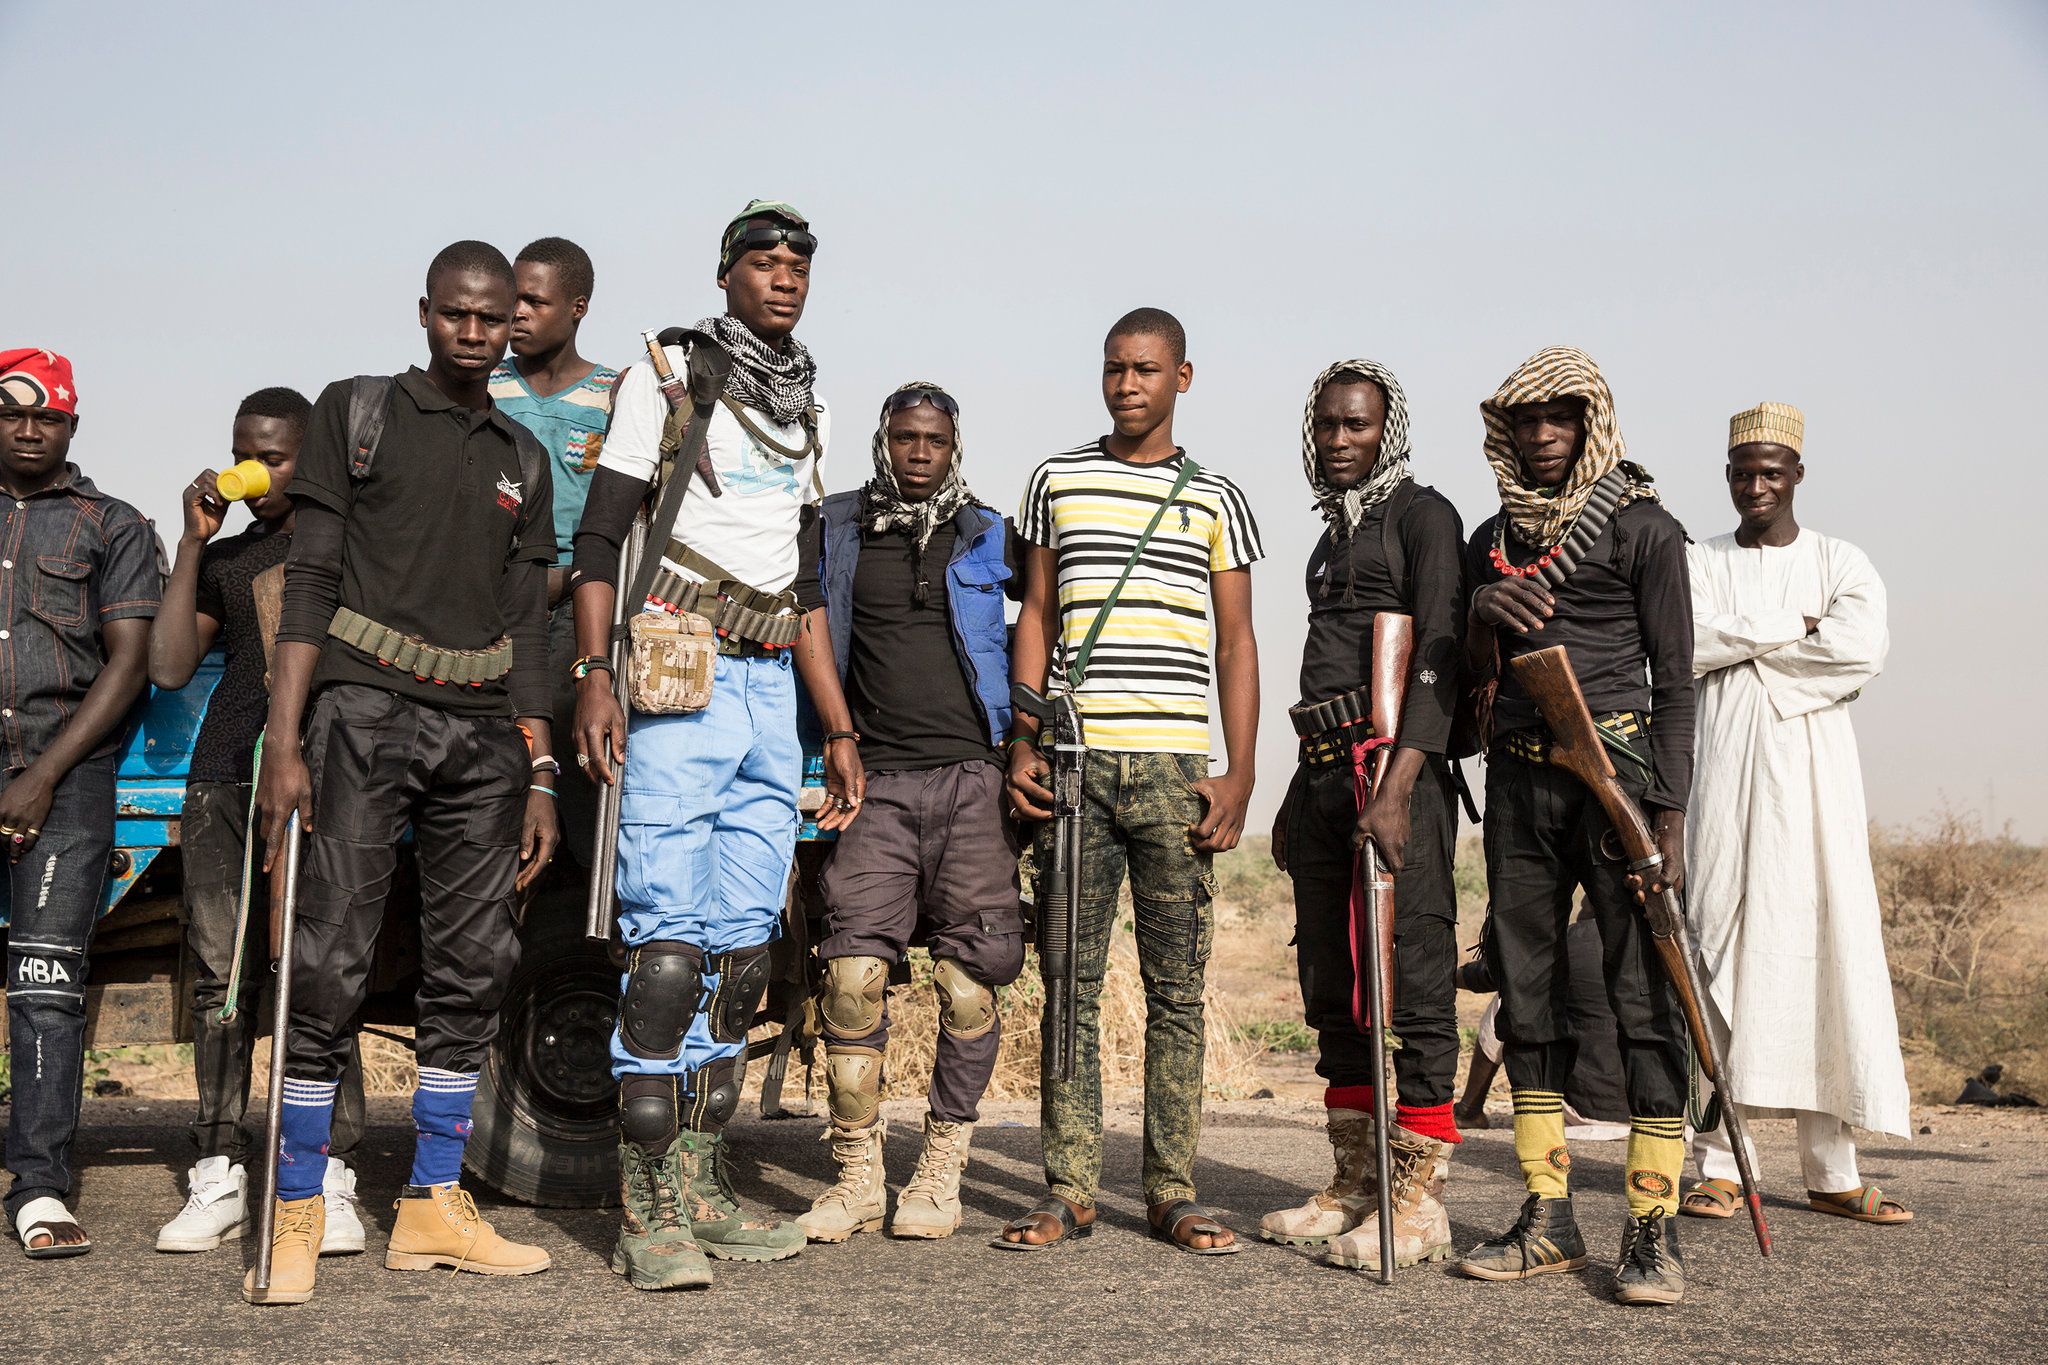 Volunteers with the Civilian Joint Task Force, which assists the military in the struggle against Boko Haram. Image by Glenna Gordon. Nigeria, 2017.